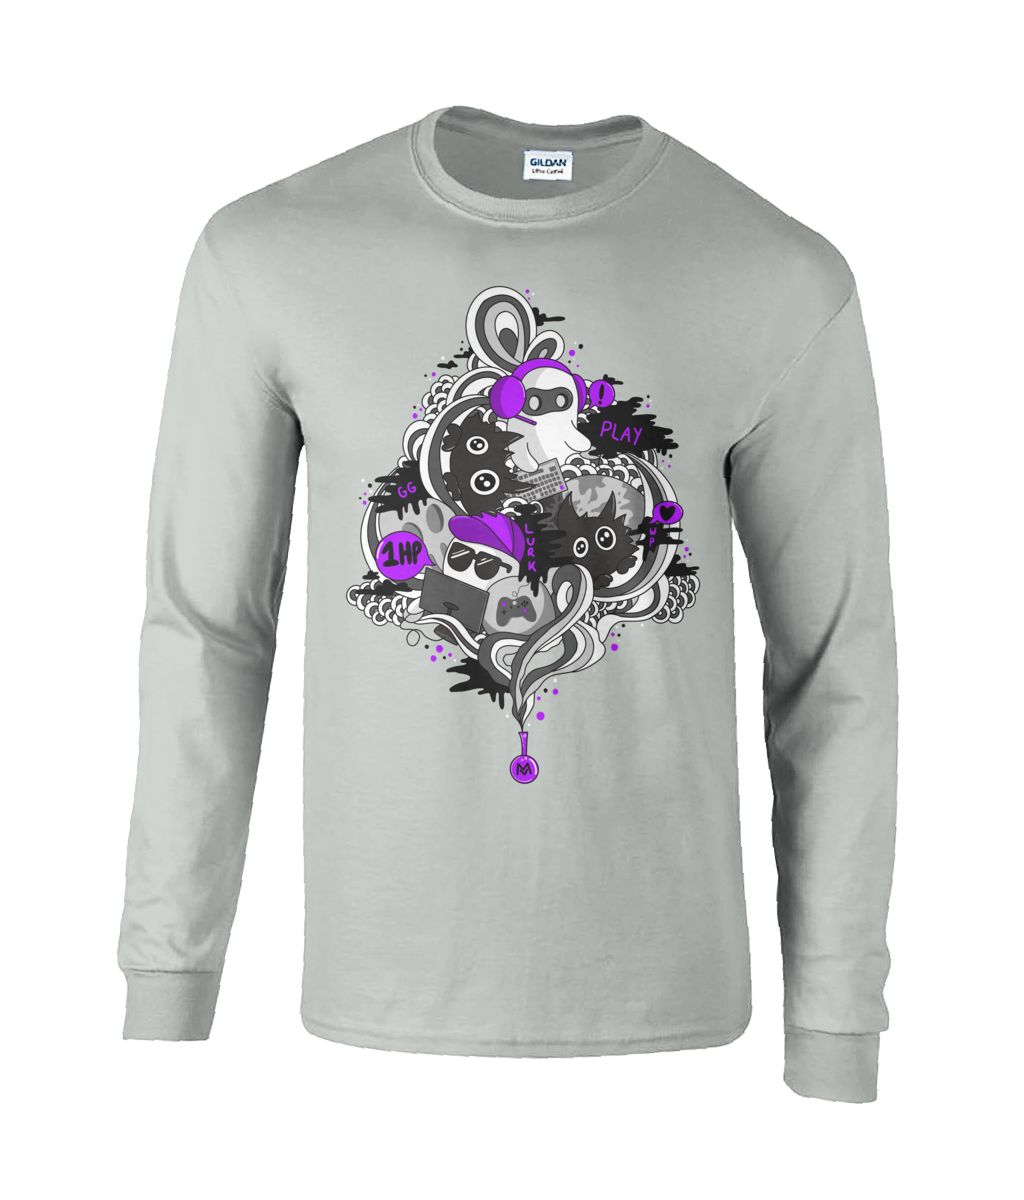 Gaming and Lurking Long Sleeve T-Shirt